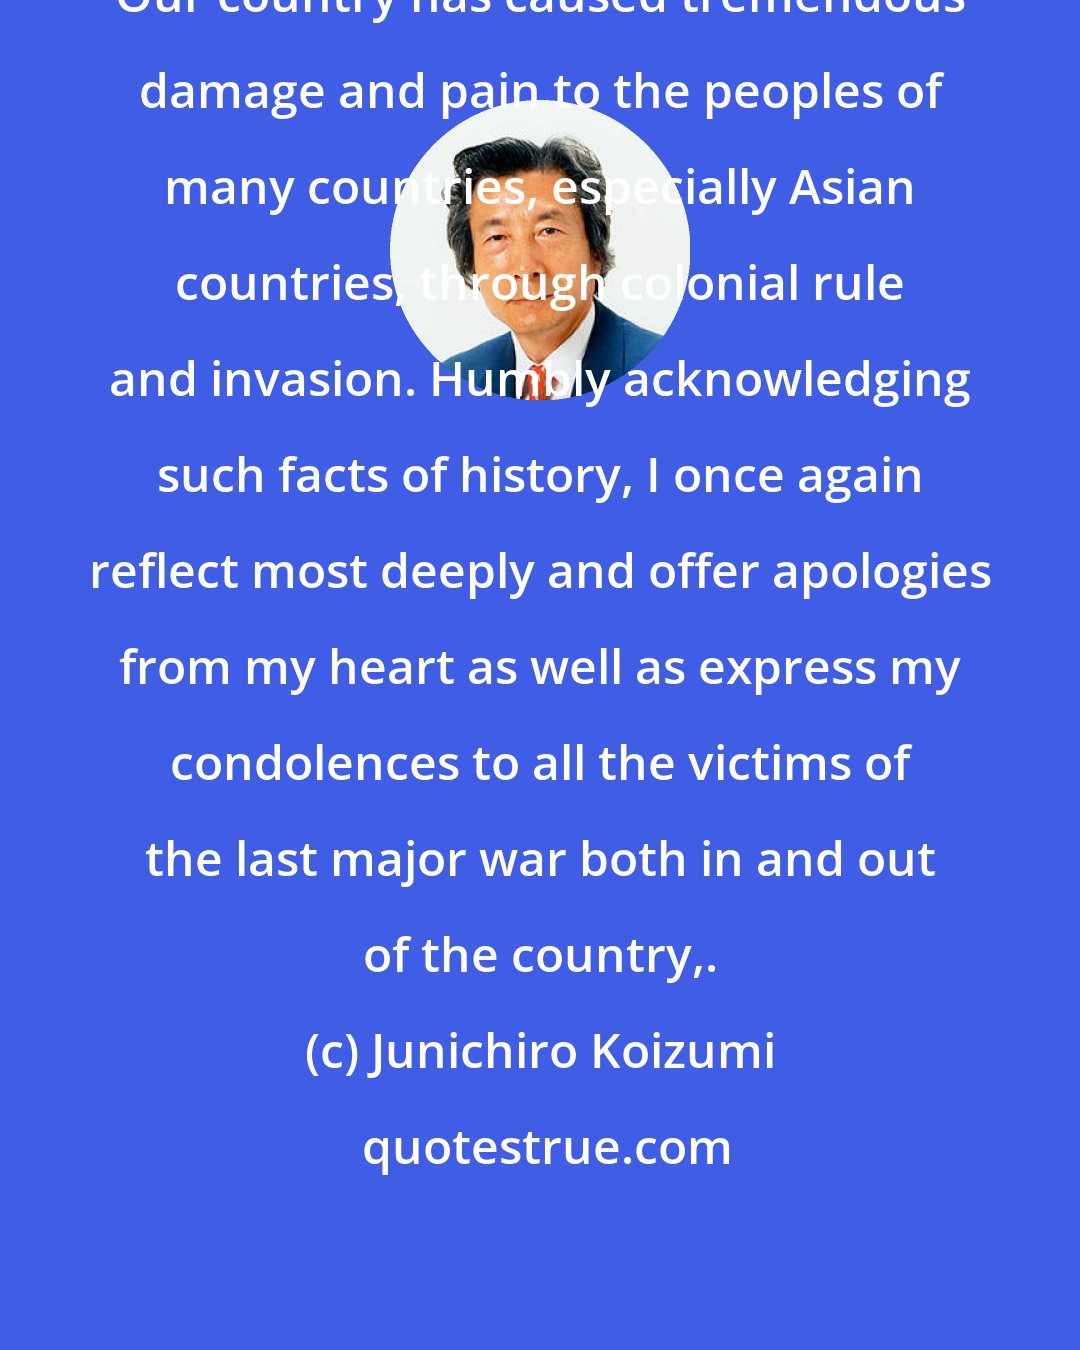 Junichiro Koizumi: Our country has caused tremendous damage and pain to the peoples of many countries, especially Asian countries, through colonial rule and invasion. Humbly acknowledging such facts of history, I once again reflect most deeply and offer apologies from my heart as well as express my condolences to all the victims of the last major war both in and out of the country,.